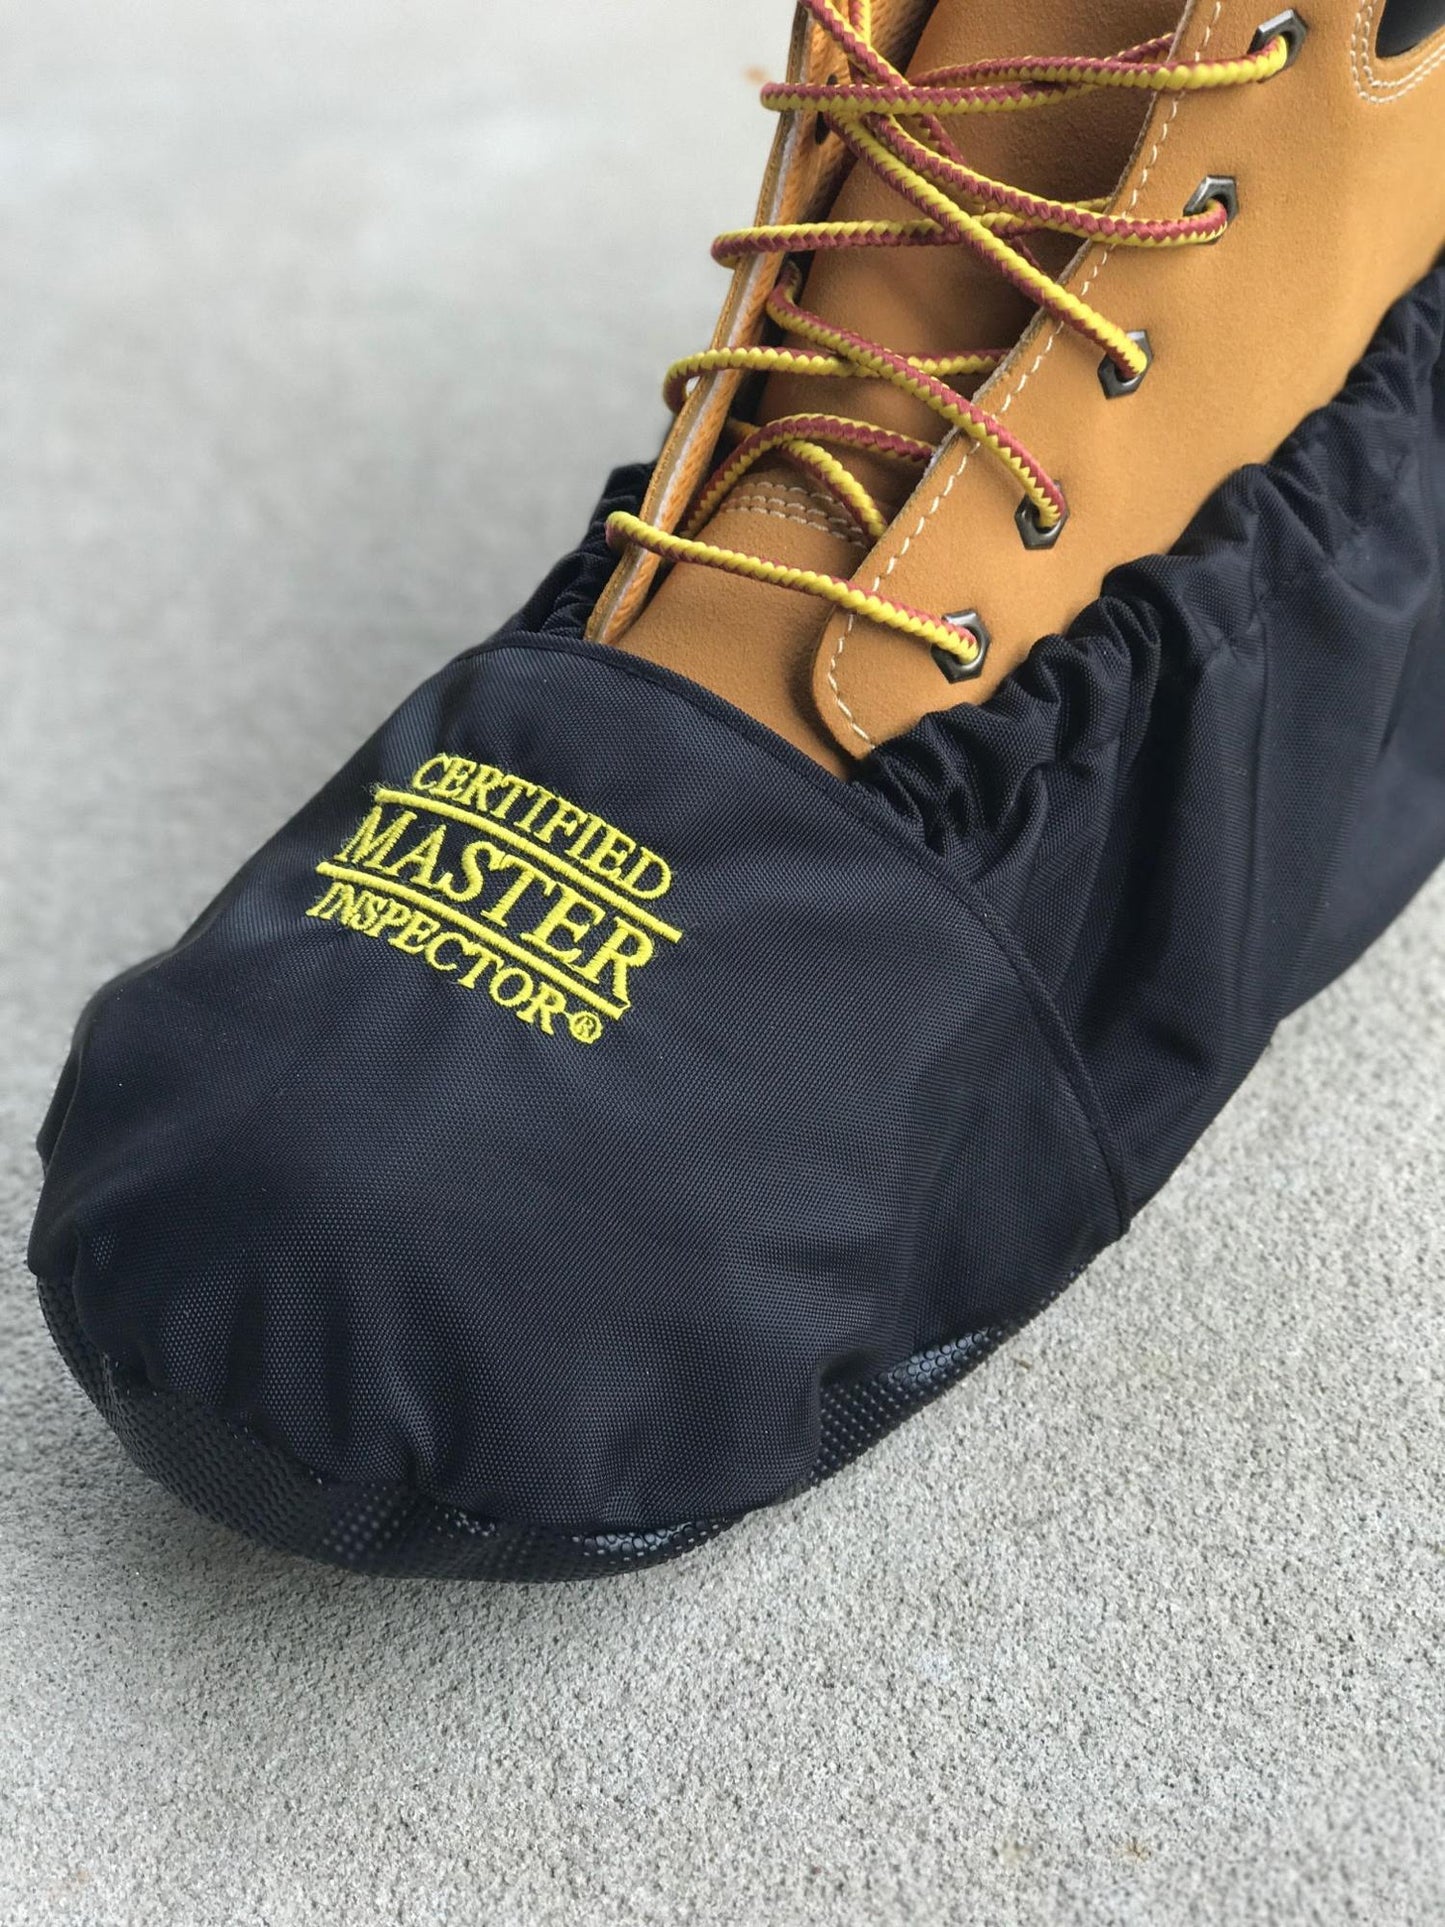 The Ultimate Shoe Covers for Certified Master Inspectors®